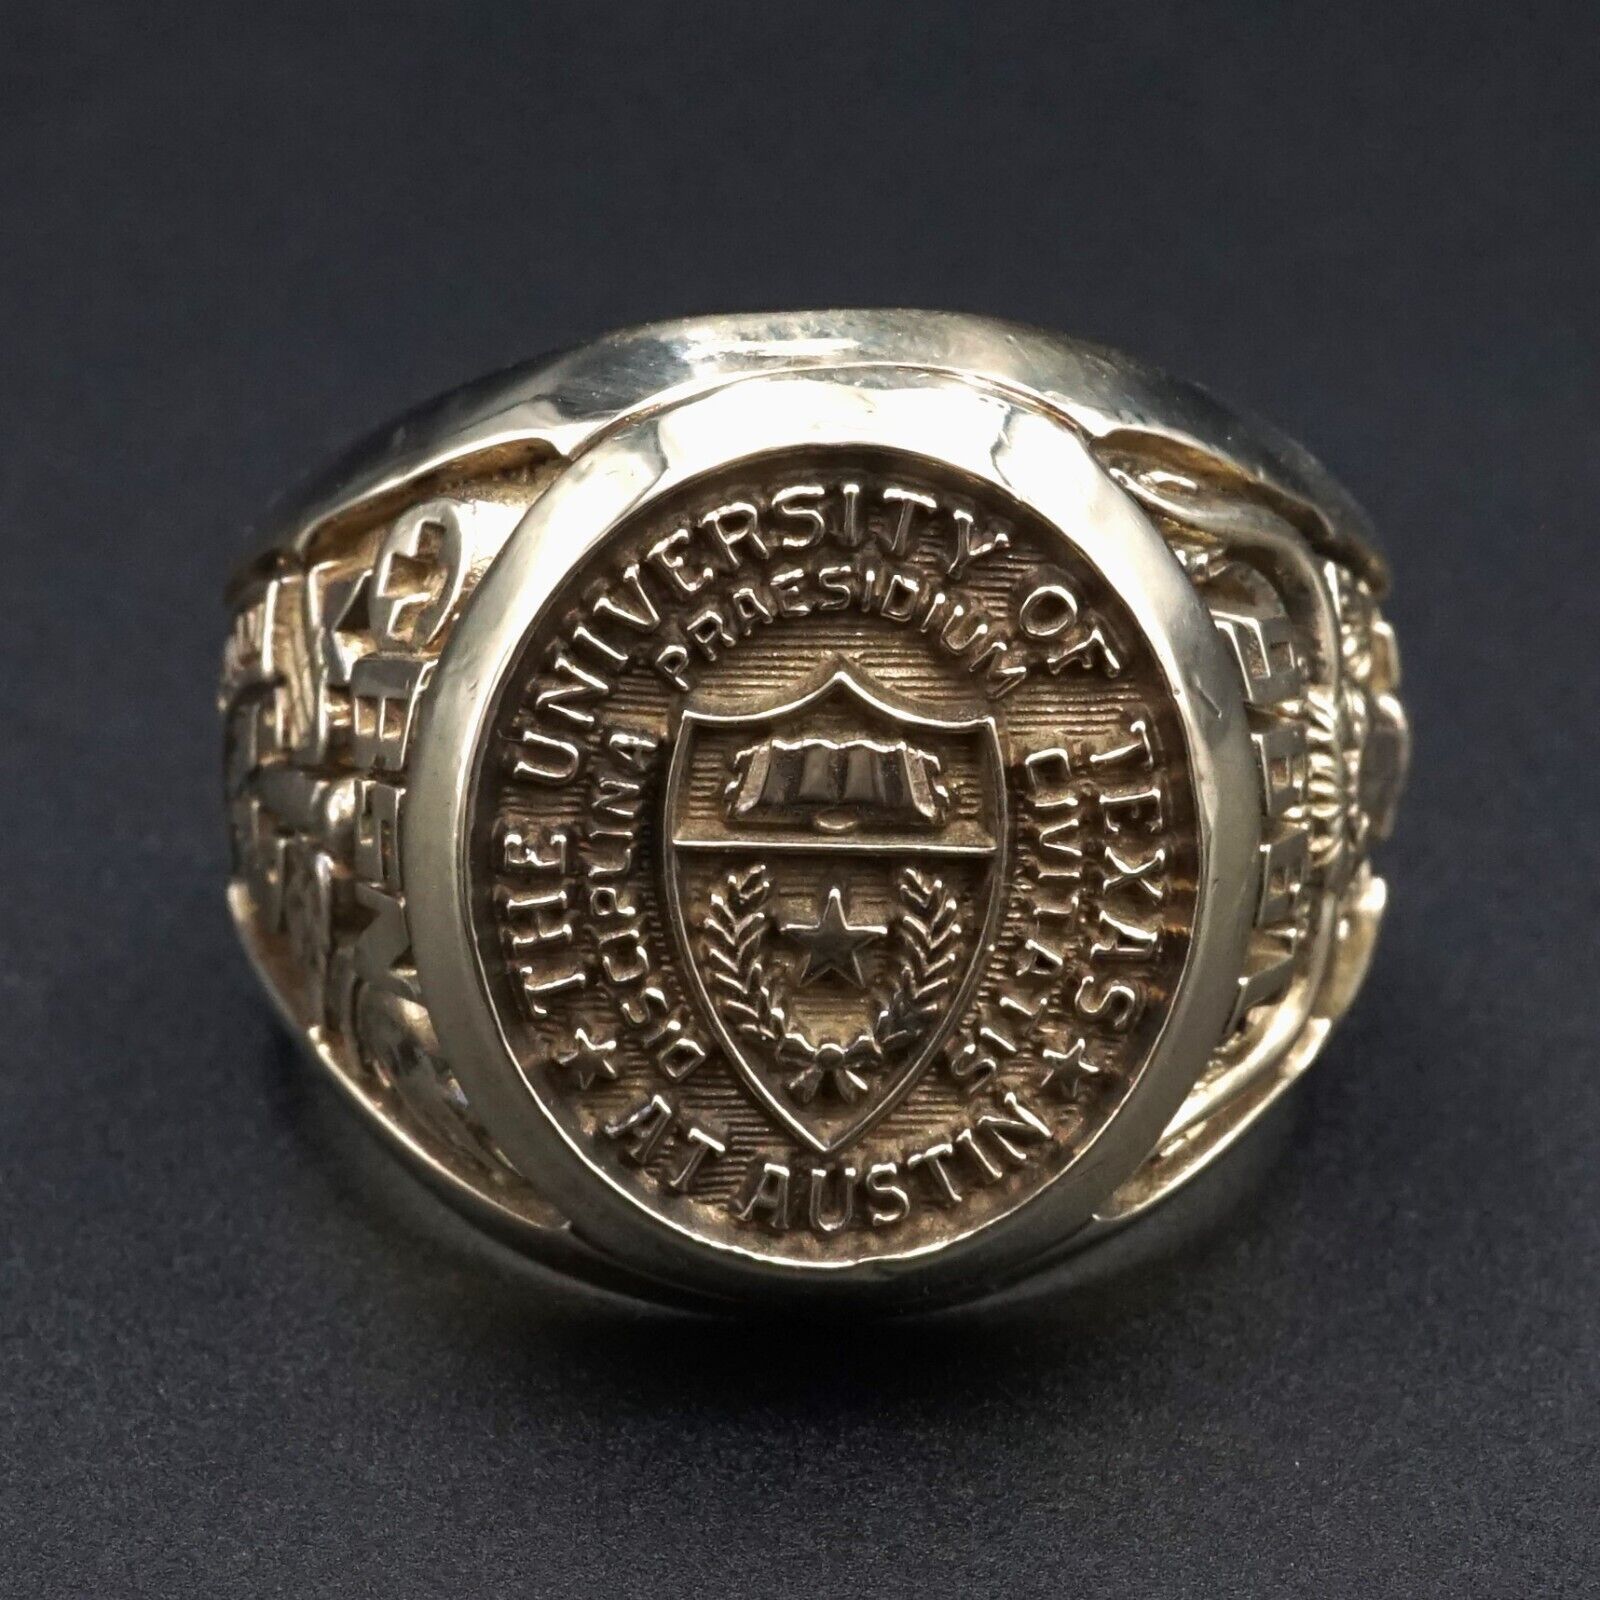 1996 University of Texas seal bachelor of science in nursing 10k gold class ring